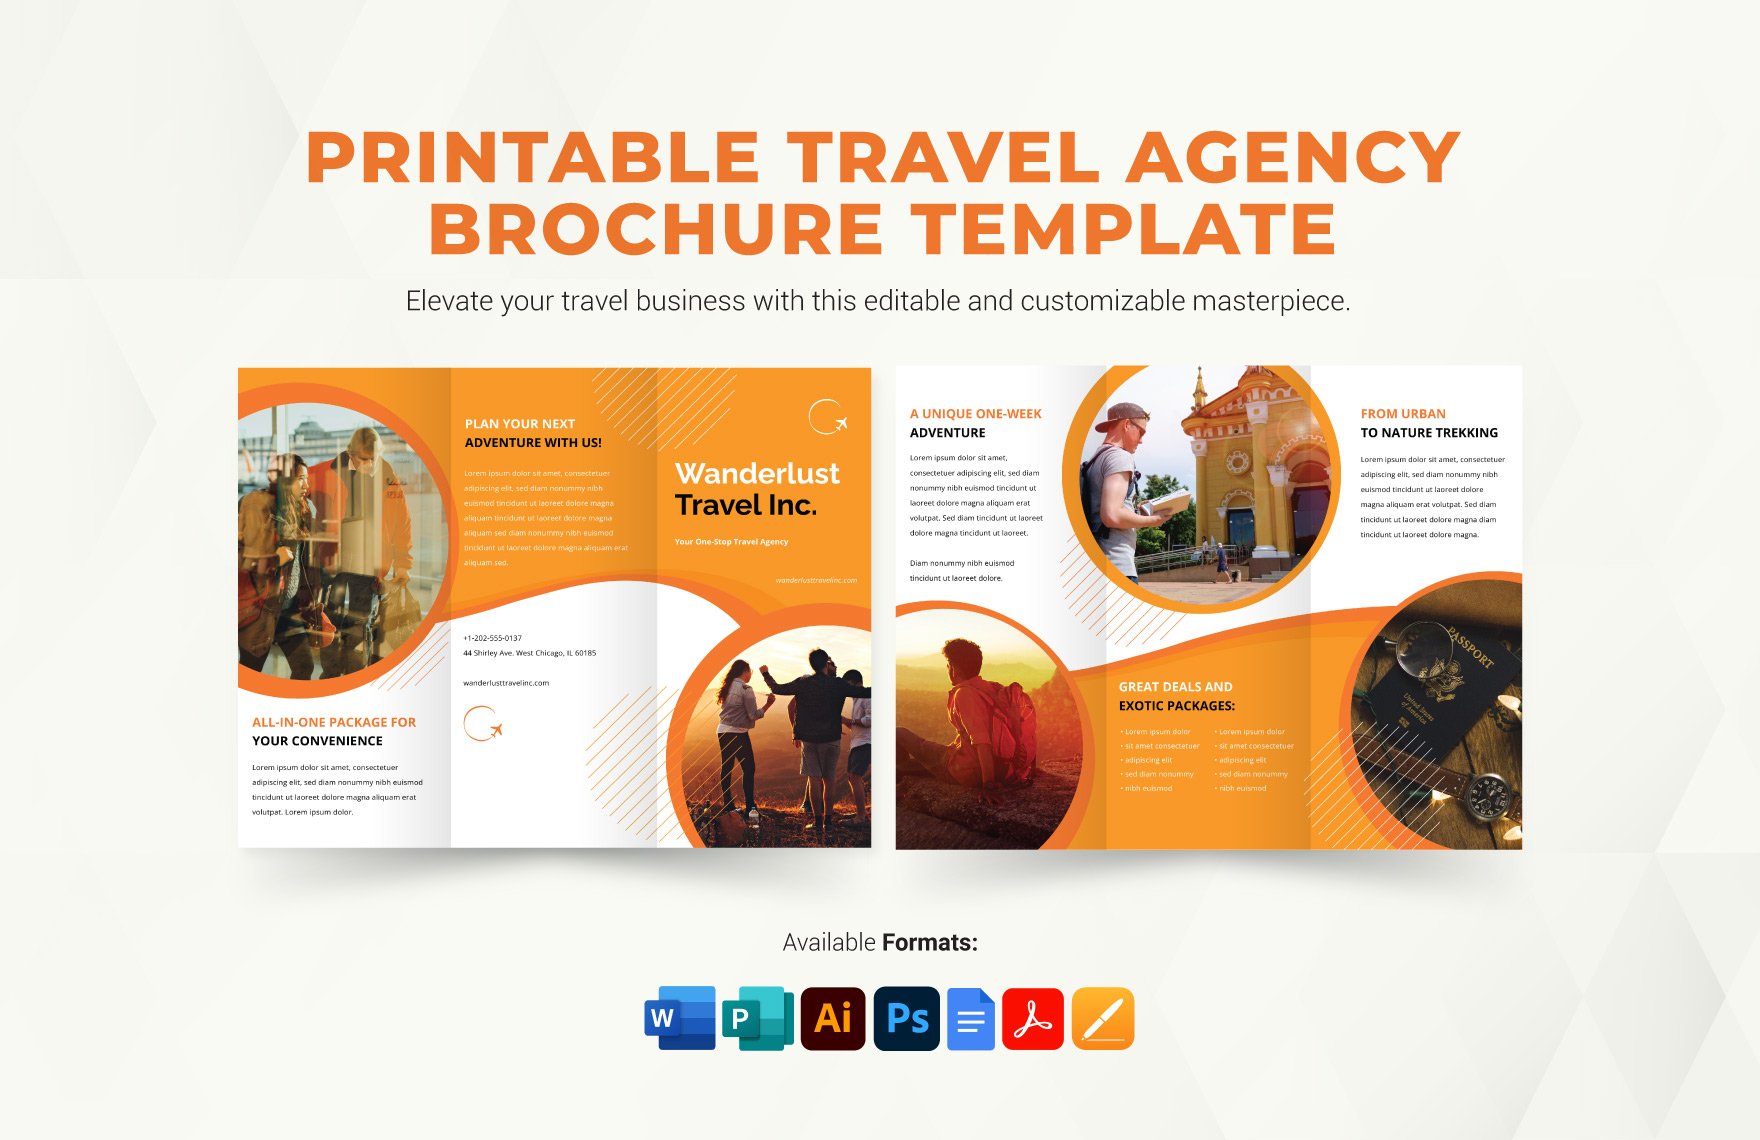 Printable Travel Agency Brochure Template in Word, Google Docs, PDF, Illustrator, PSD, Apple Pages, Publisher